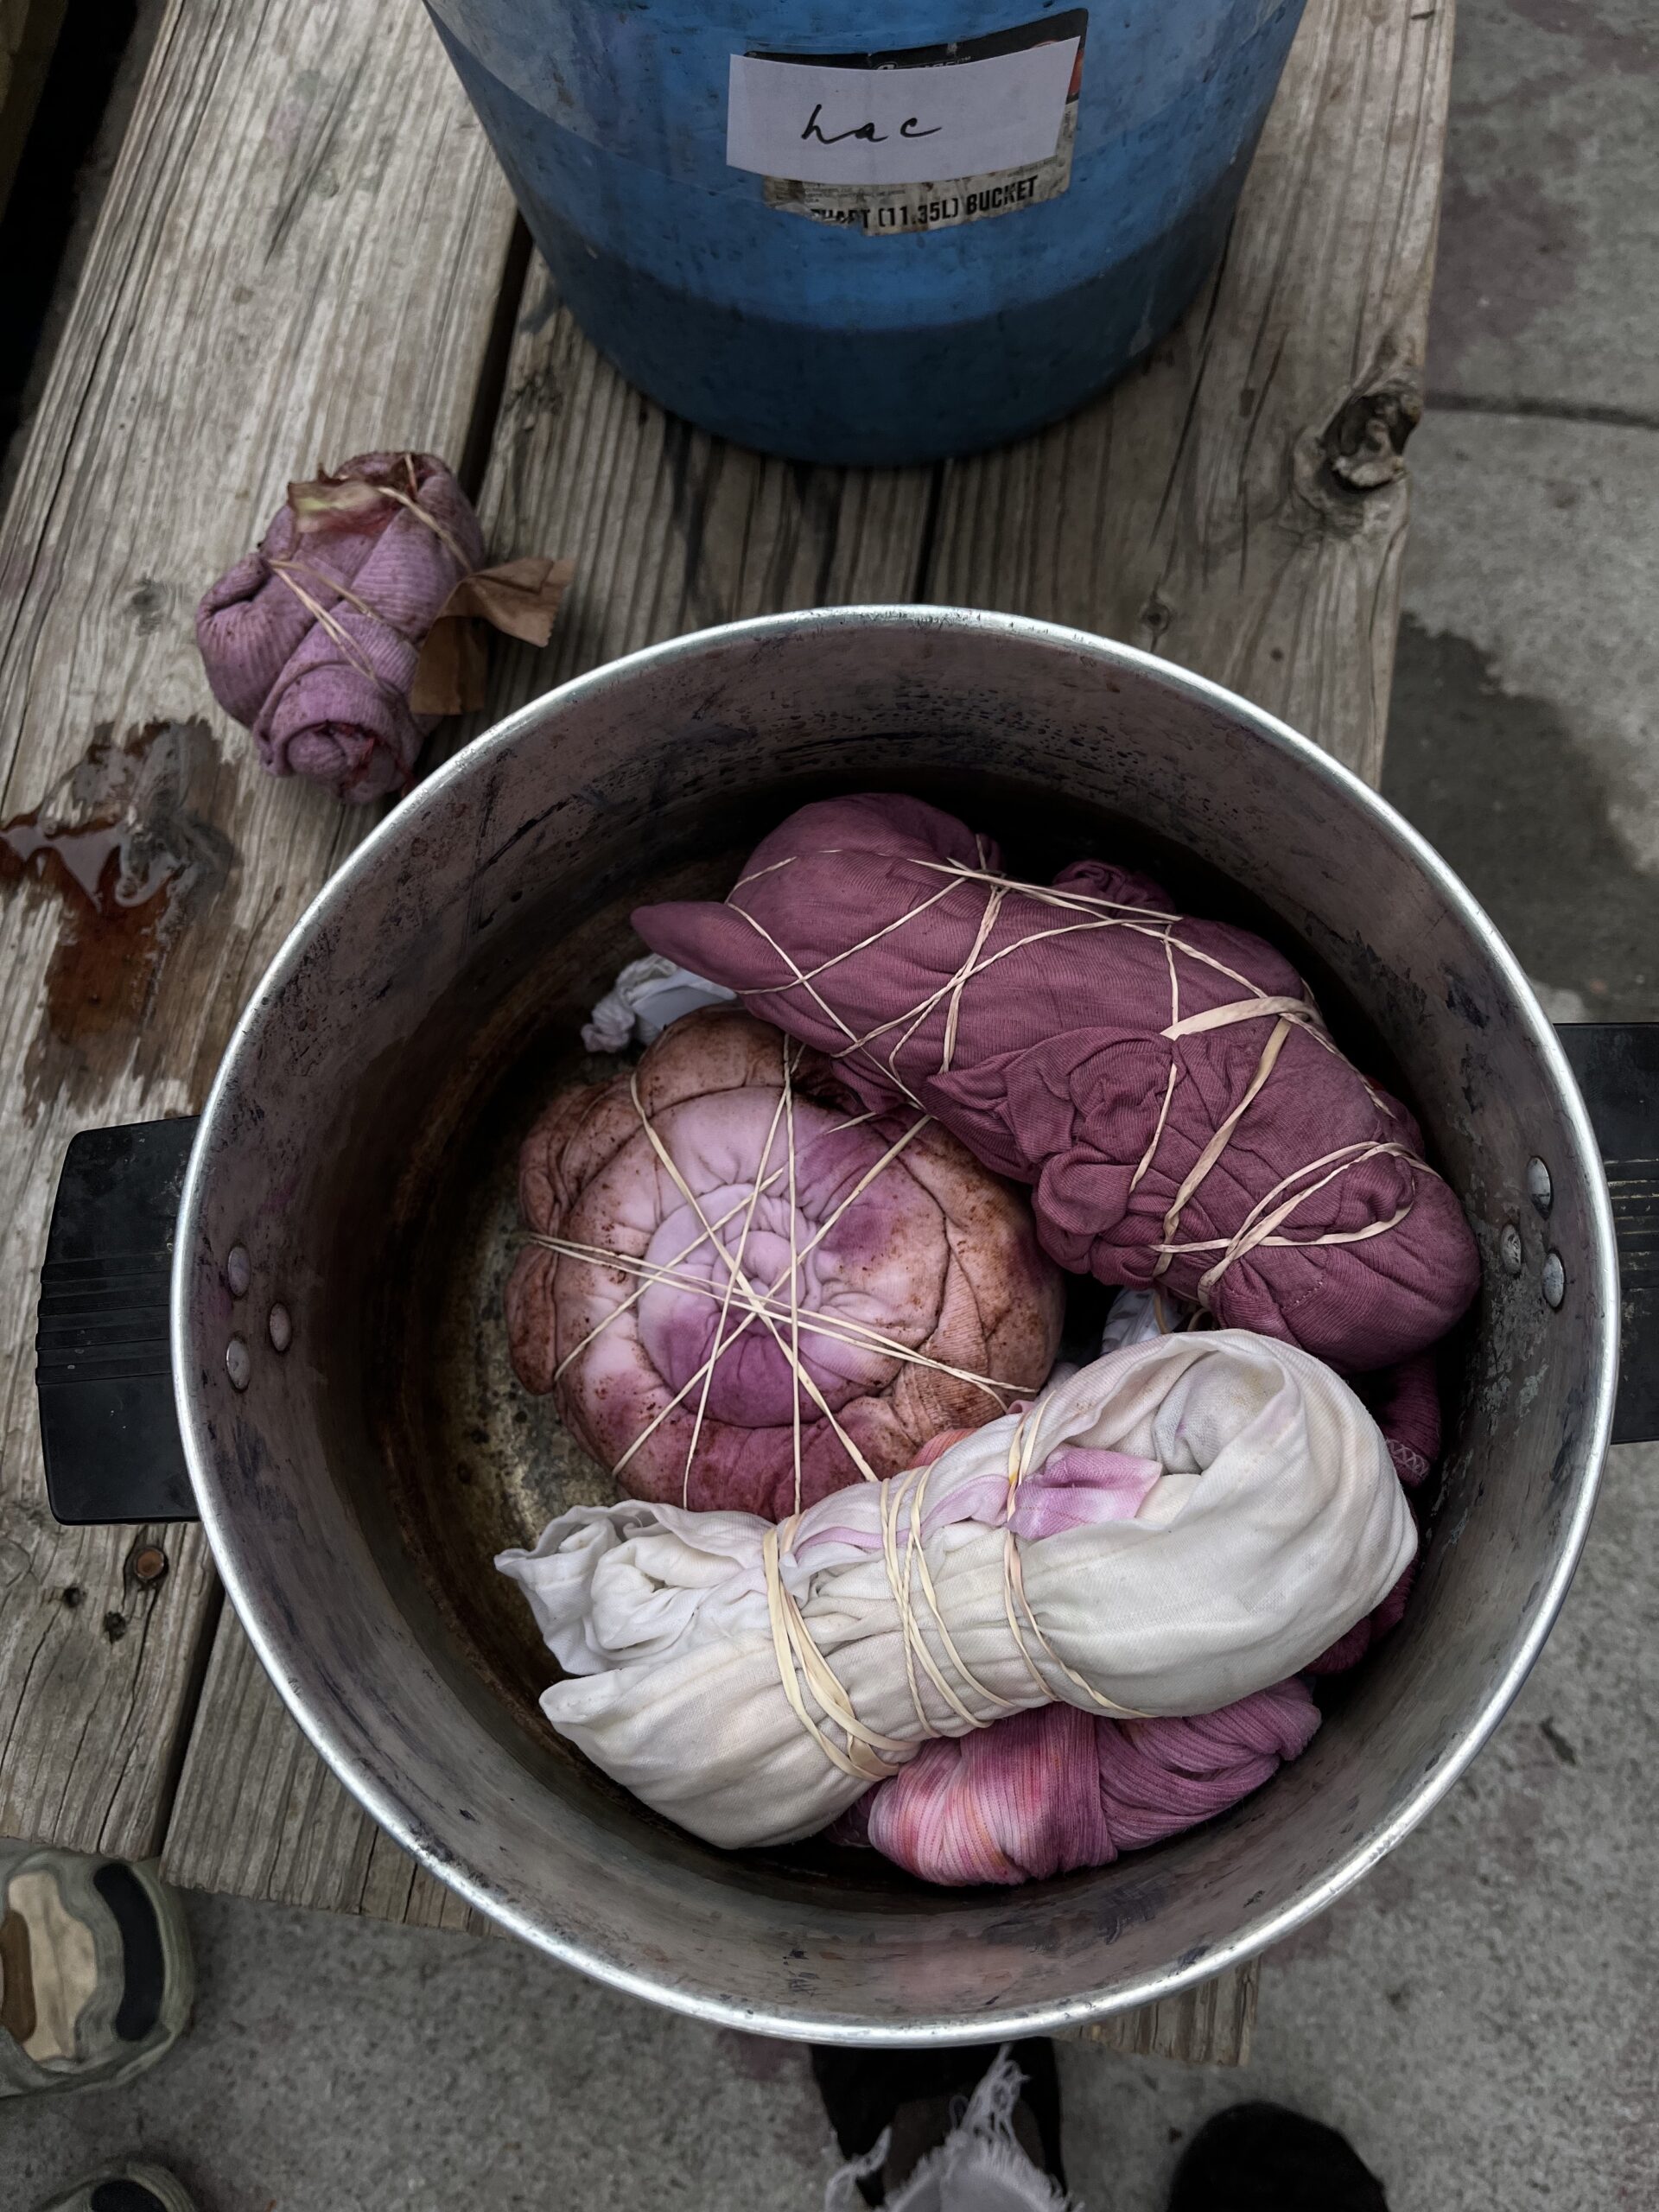 A steel pot holds three purple-dyed garments, rubber bands criss cross in preparation for tie dye.